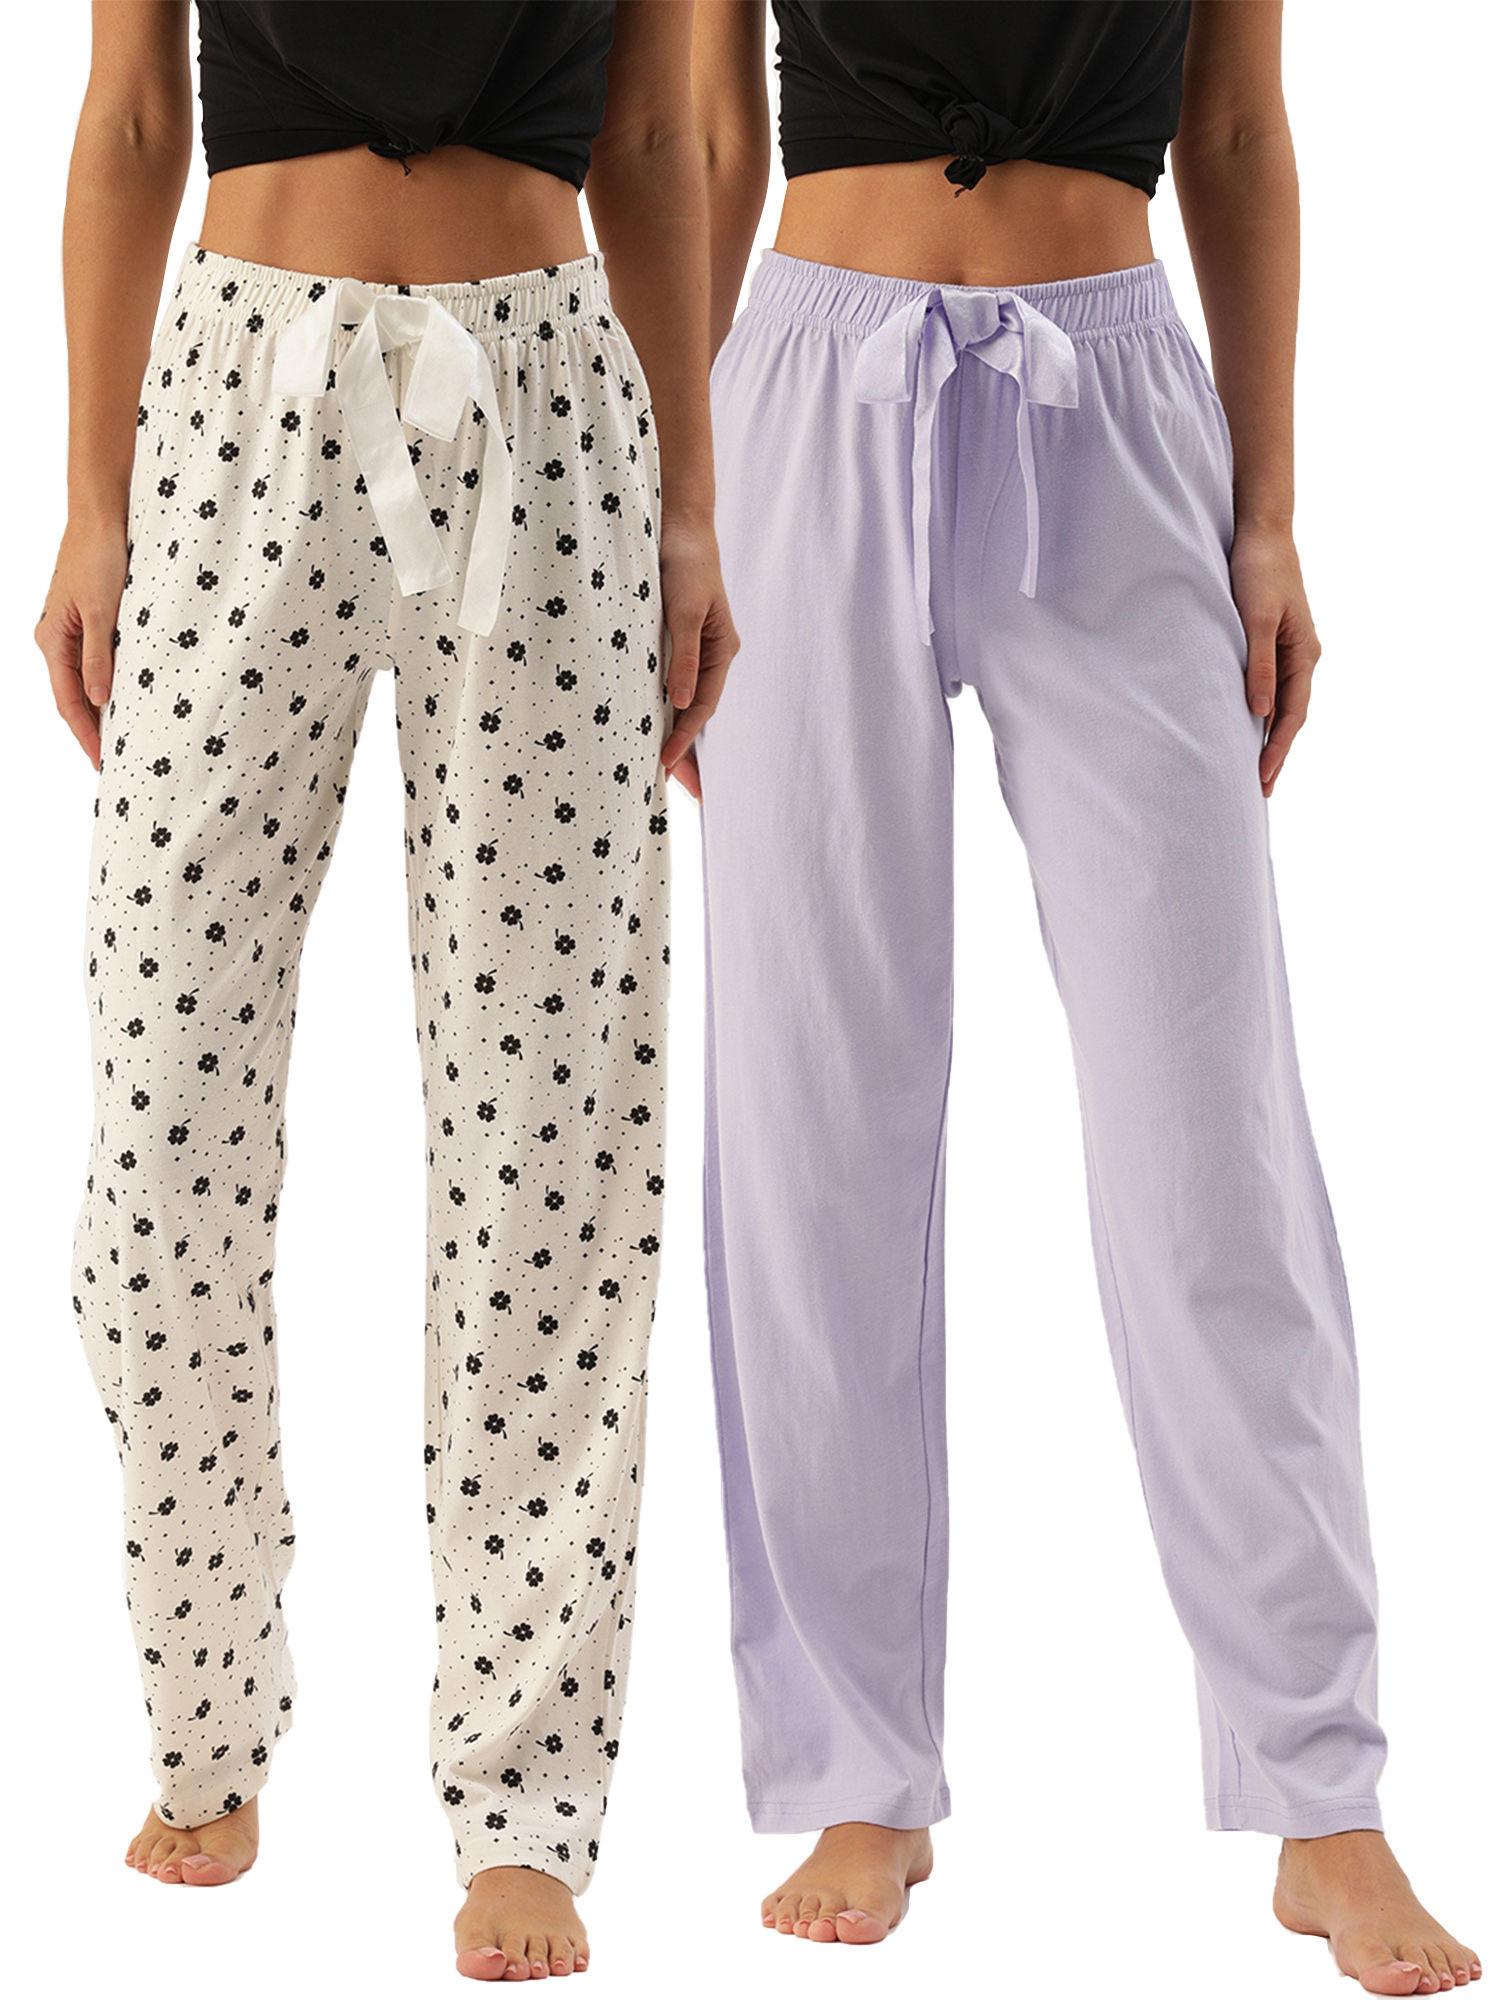 pack of 2 lounge pants - aop snow white + solid lavender